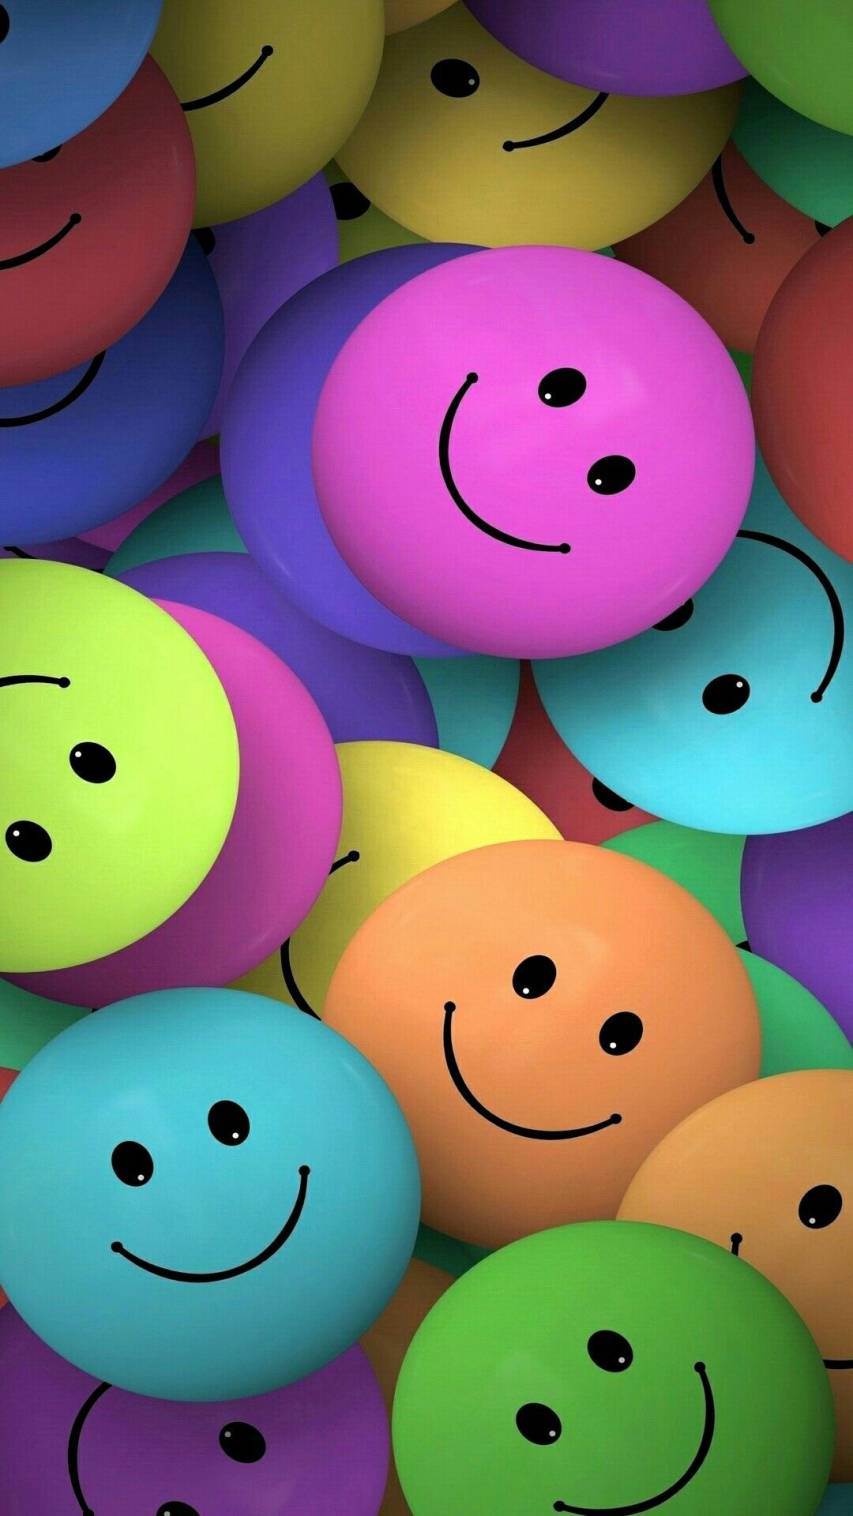 Colorful Smiley face Wallpaper for iPhone